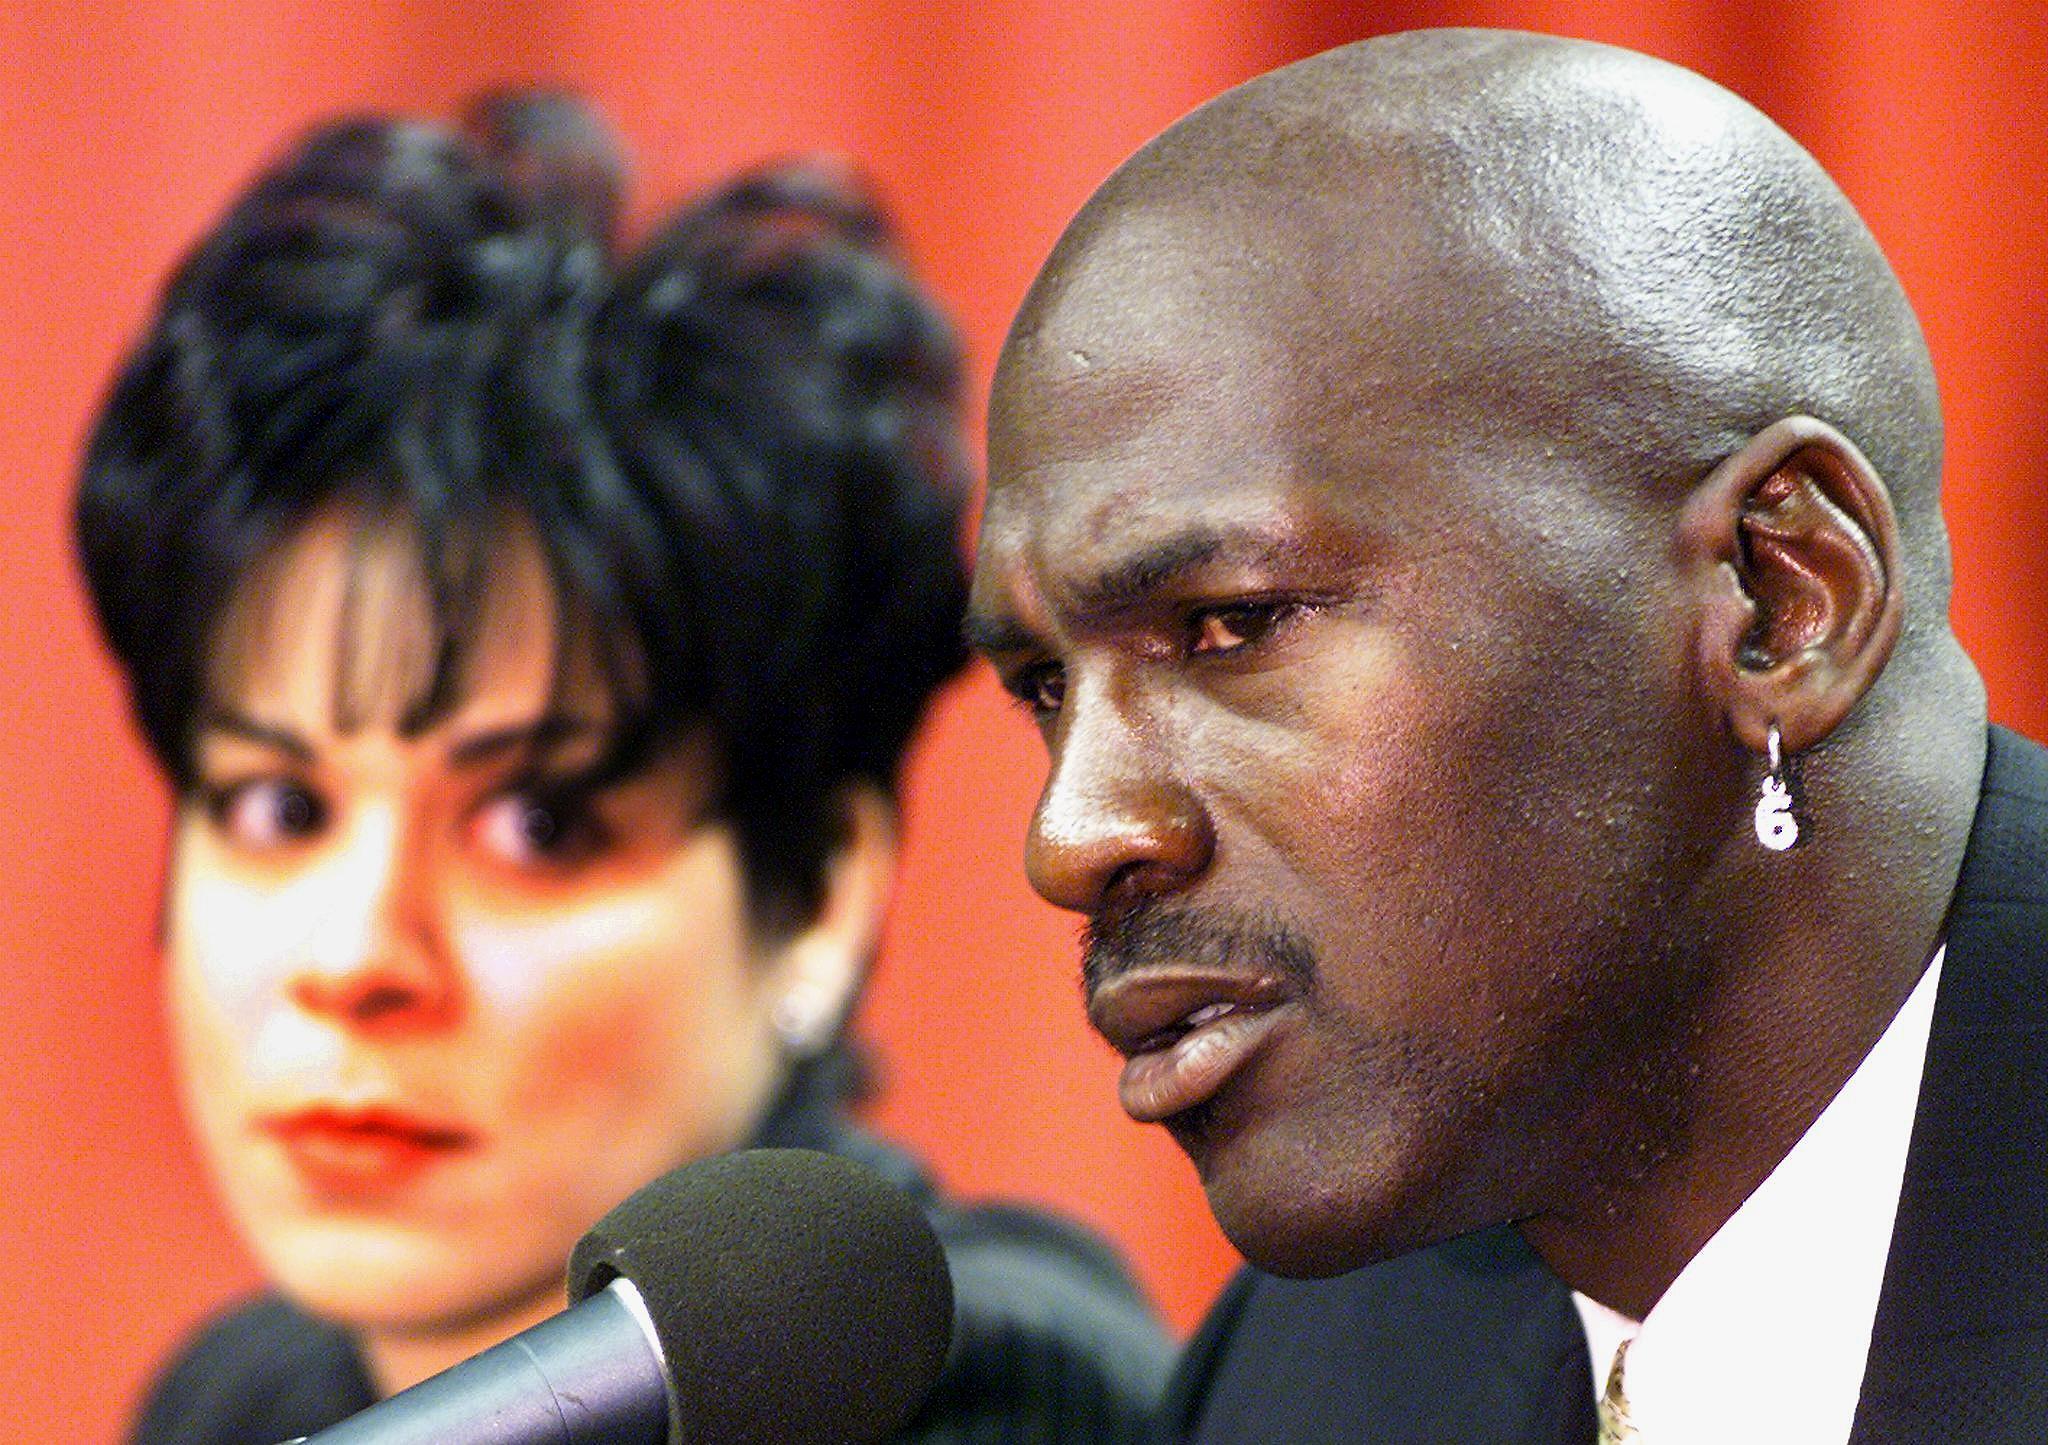 Juanita Vanoy and Michael Jordan at a press conference on January 13, 1999 | Source: Getty Images